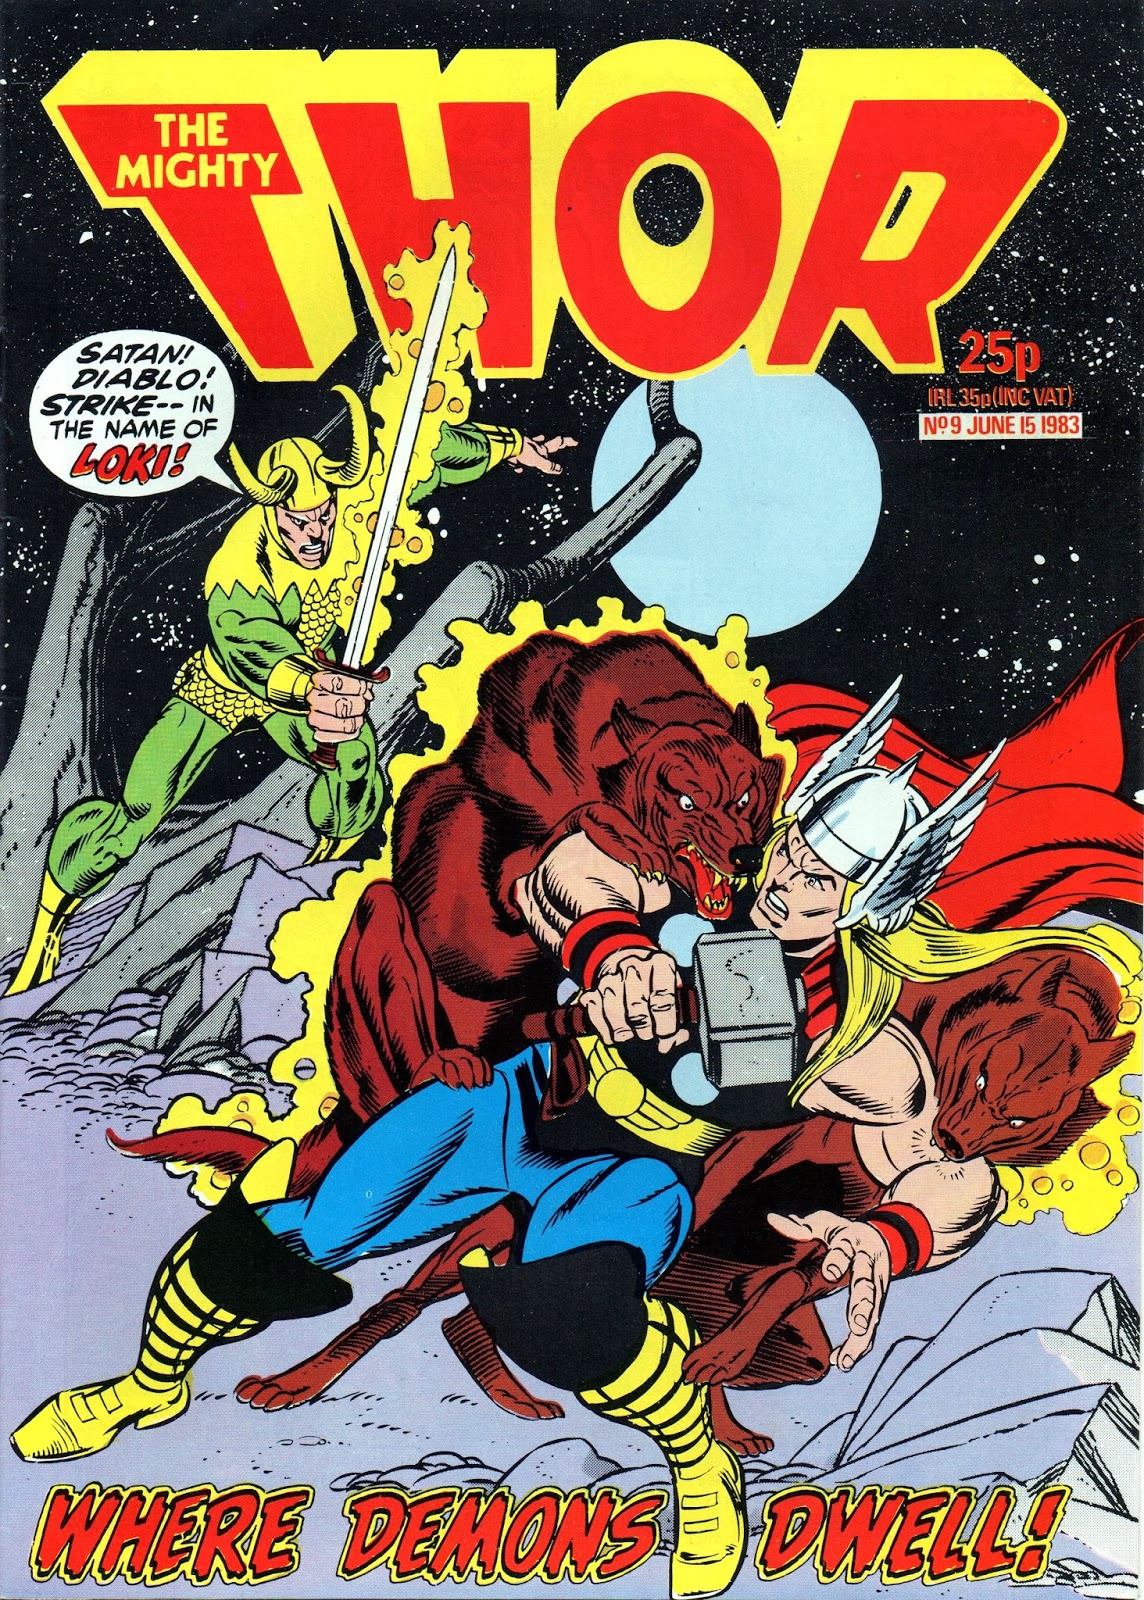 CRIVENS! COMICS & STUFF: THE MIGHTY THOR COVER GALLERY - PART ONE...